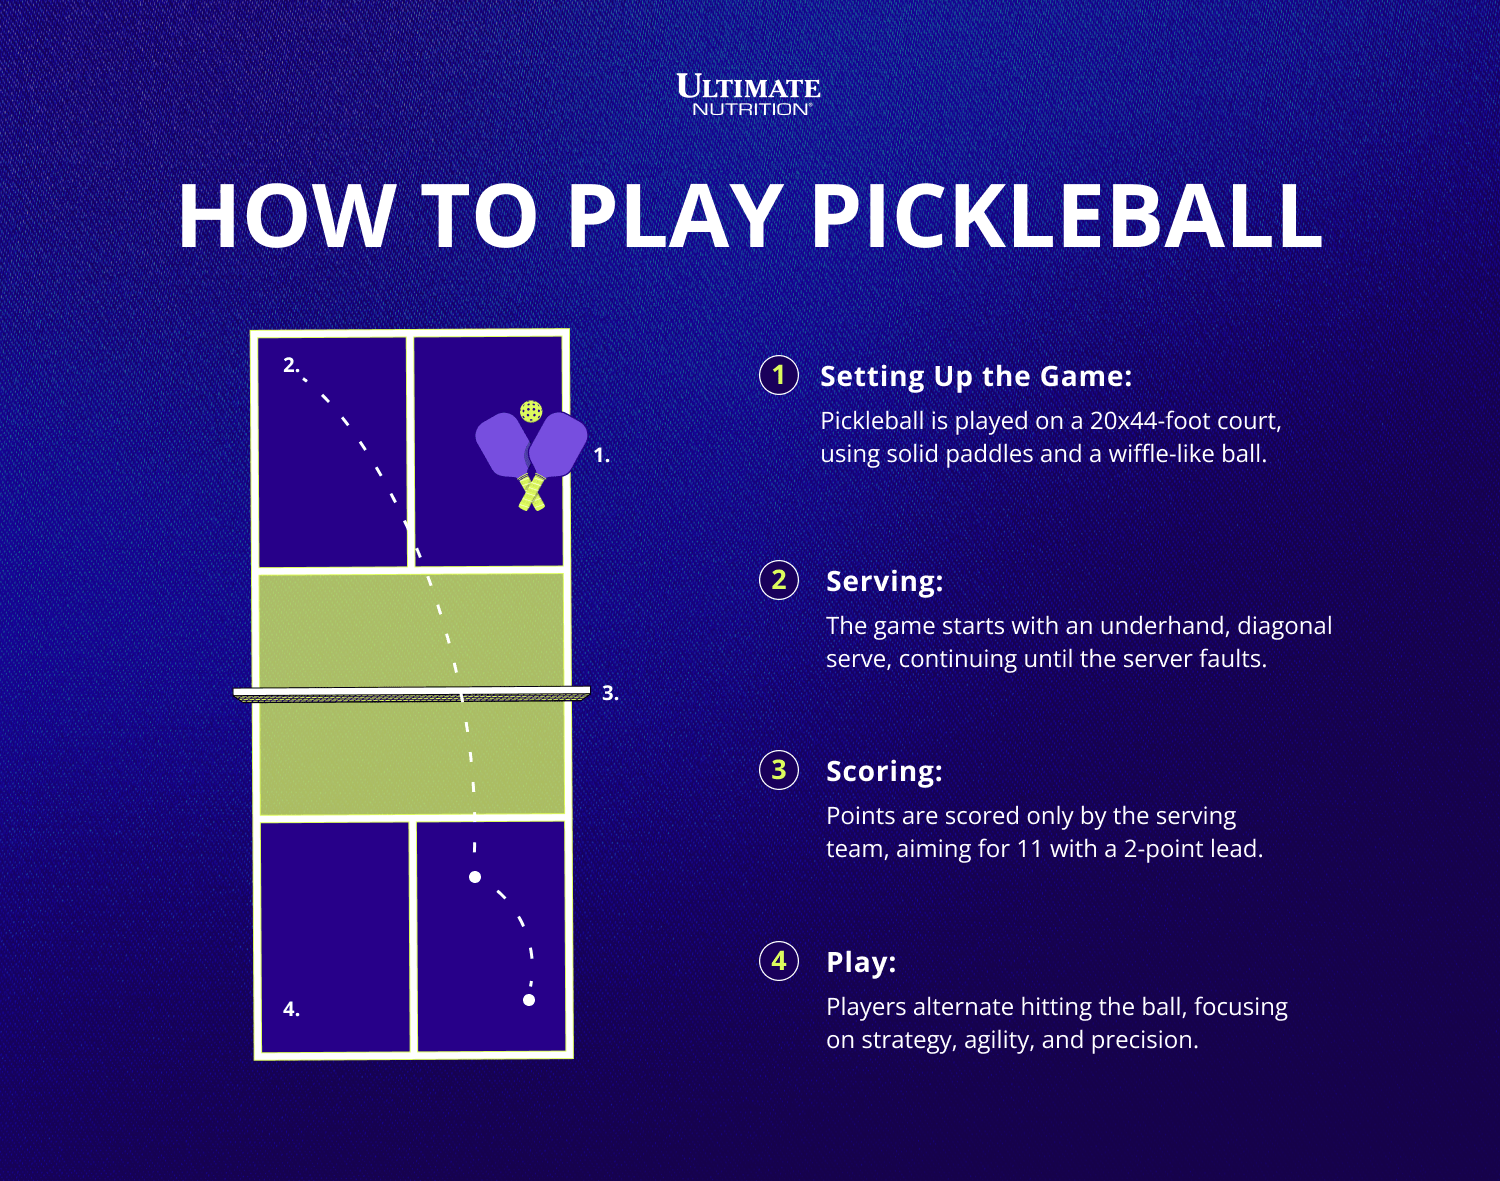 How to Play Pickleball Infographic | Ultimate Nutrition